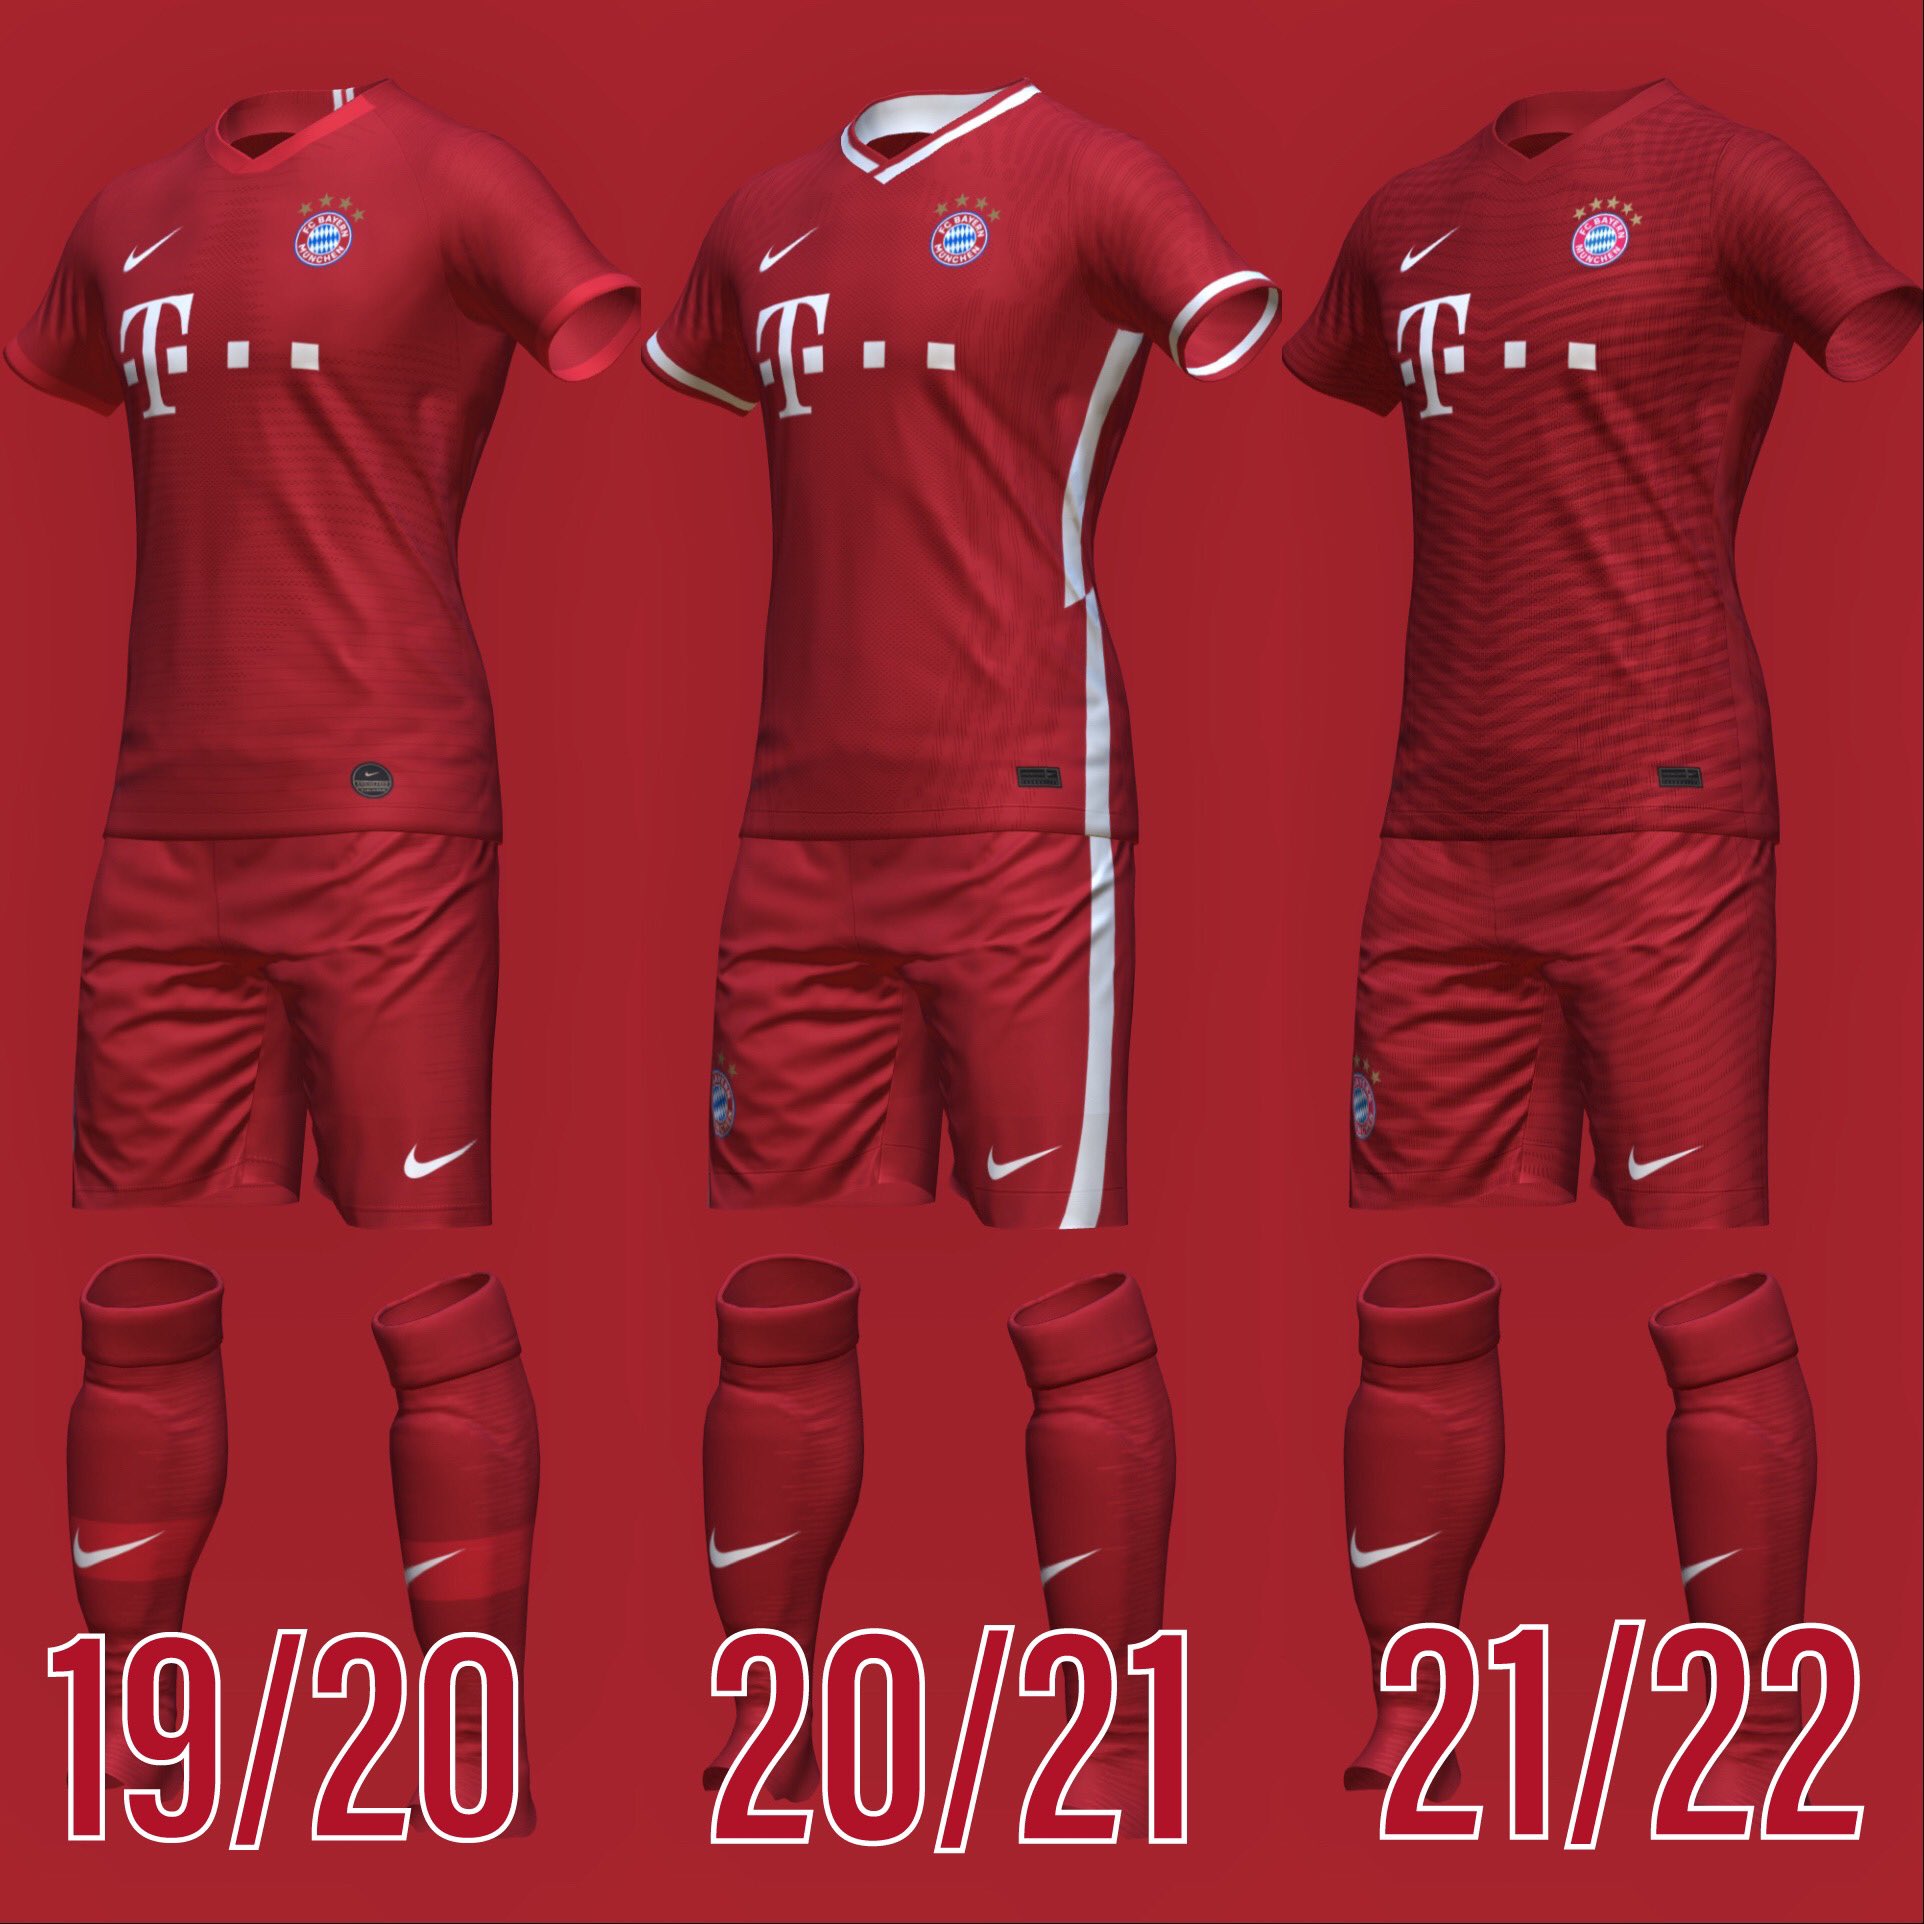 Situatie Uitstekend Wedstrijd cj23designs on Twitter: "What if Bayern Munich were sponsored by Nike? An  alternate reality kit history from 16/17-present. @fifakitcreator  @PESMasterSite @Footy_Headlines #FCBayern #BayernMunich #nike #fifa #fifa22  #pes #eFootball2022 https://t.co ...